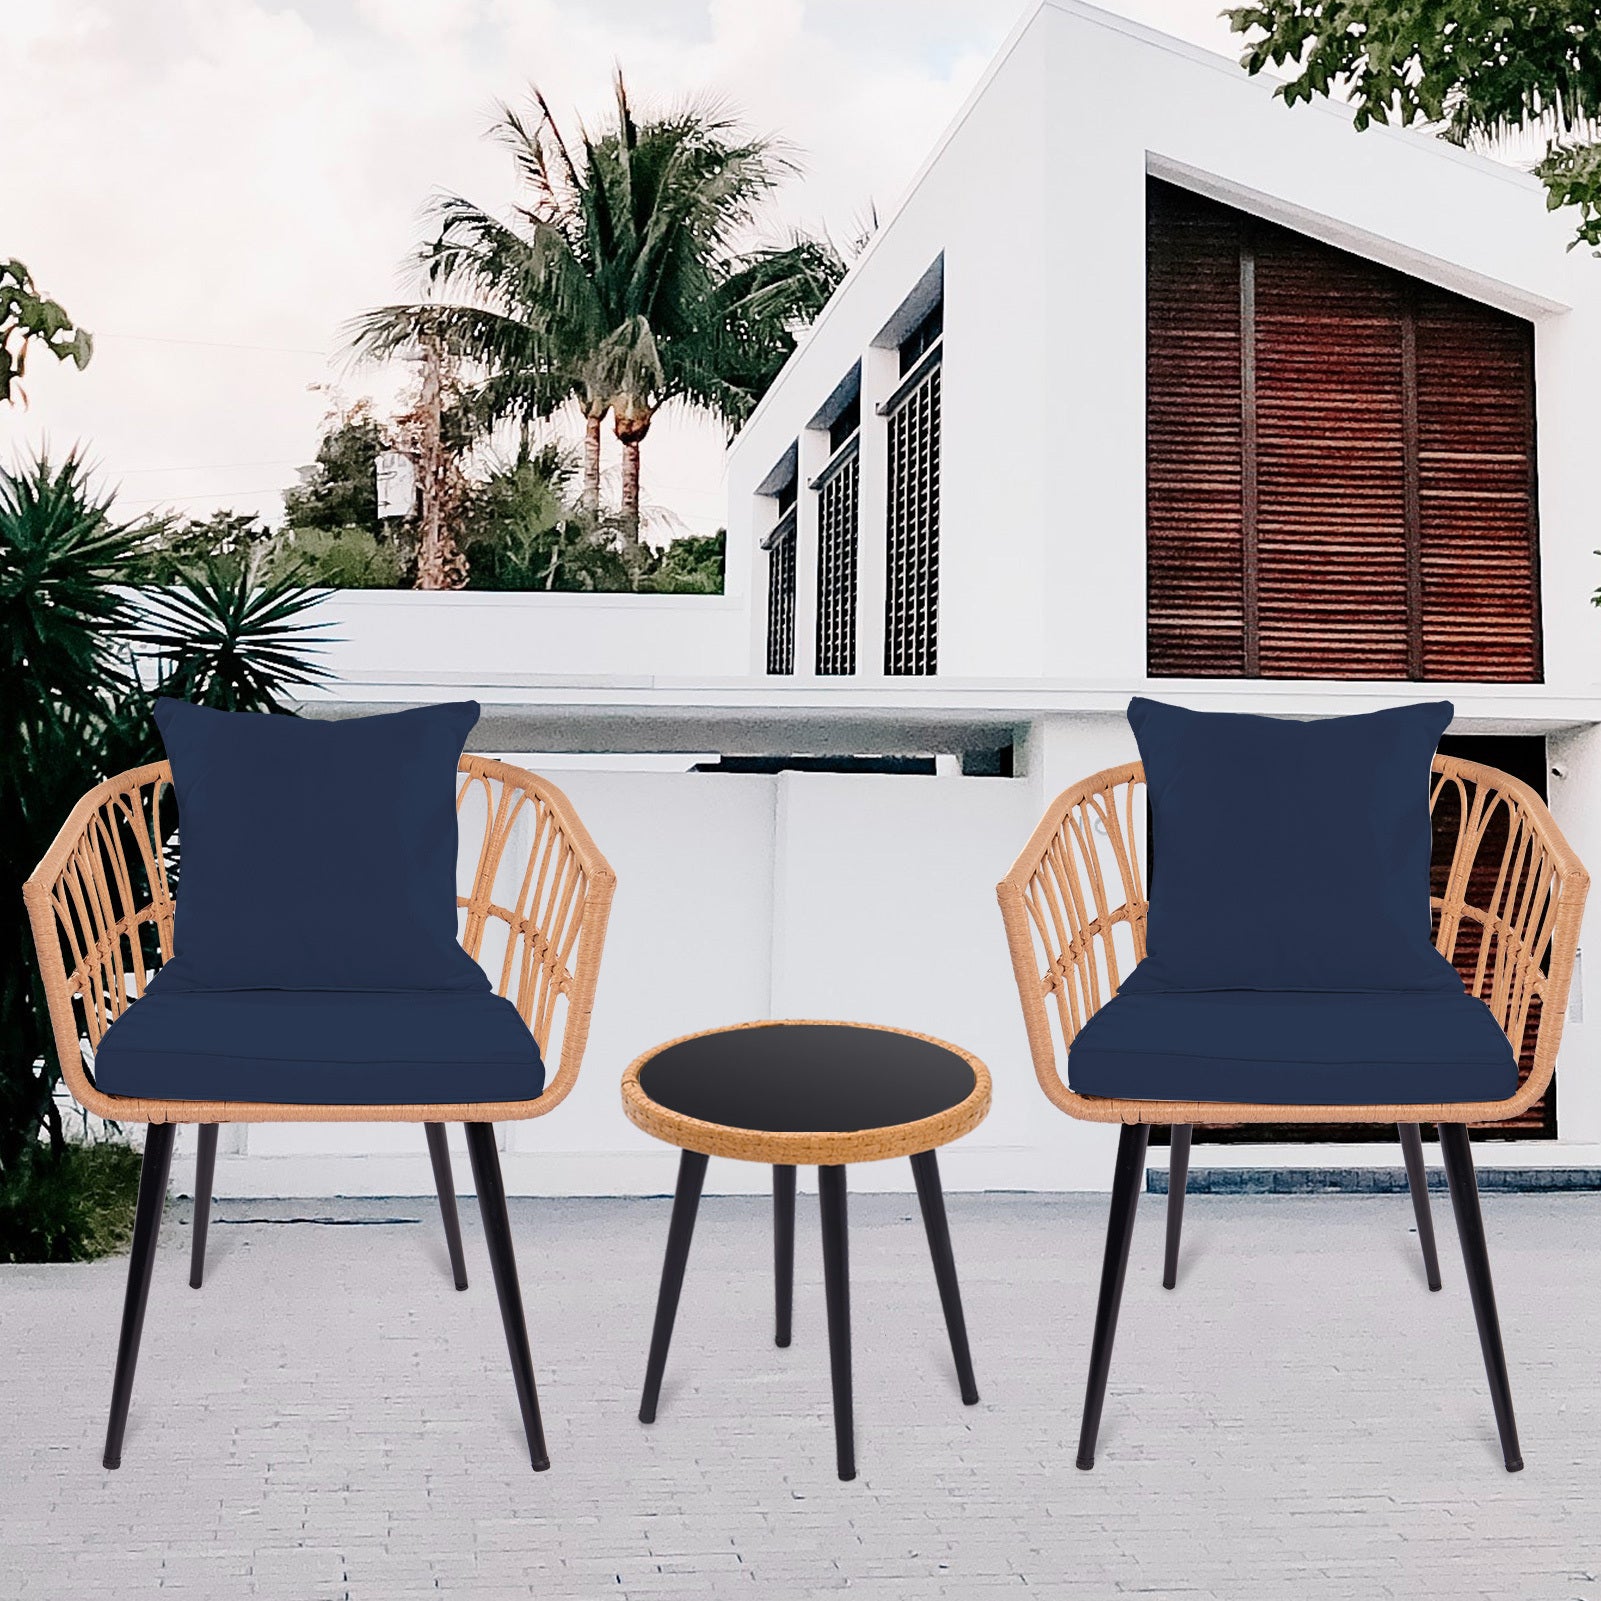 3 Piece Patio Bistro Set with Side Table